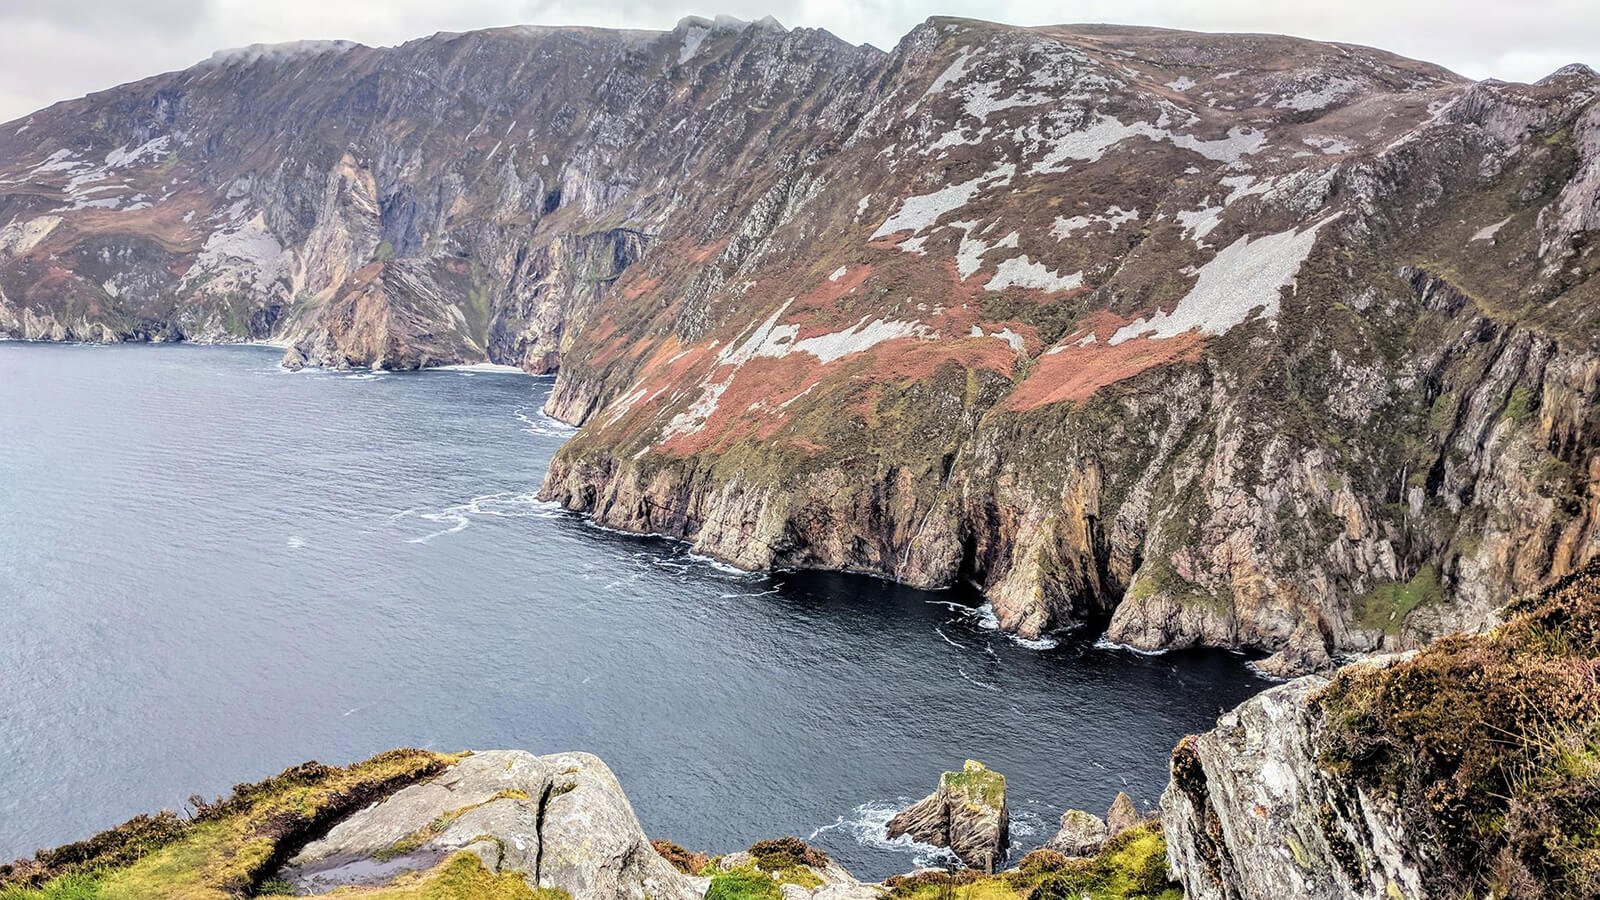 A scenic view of the Slieve League cliffs and the Atlantic Ocean